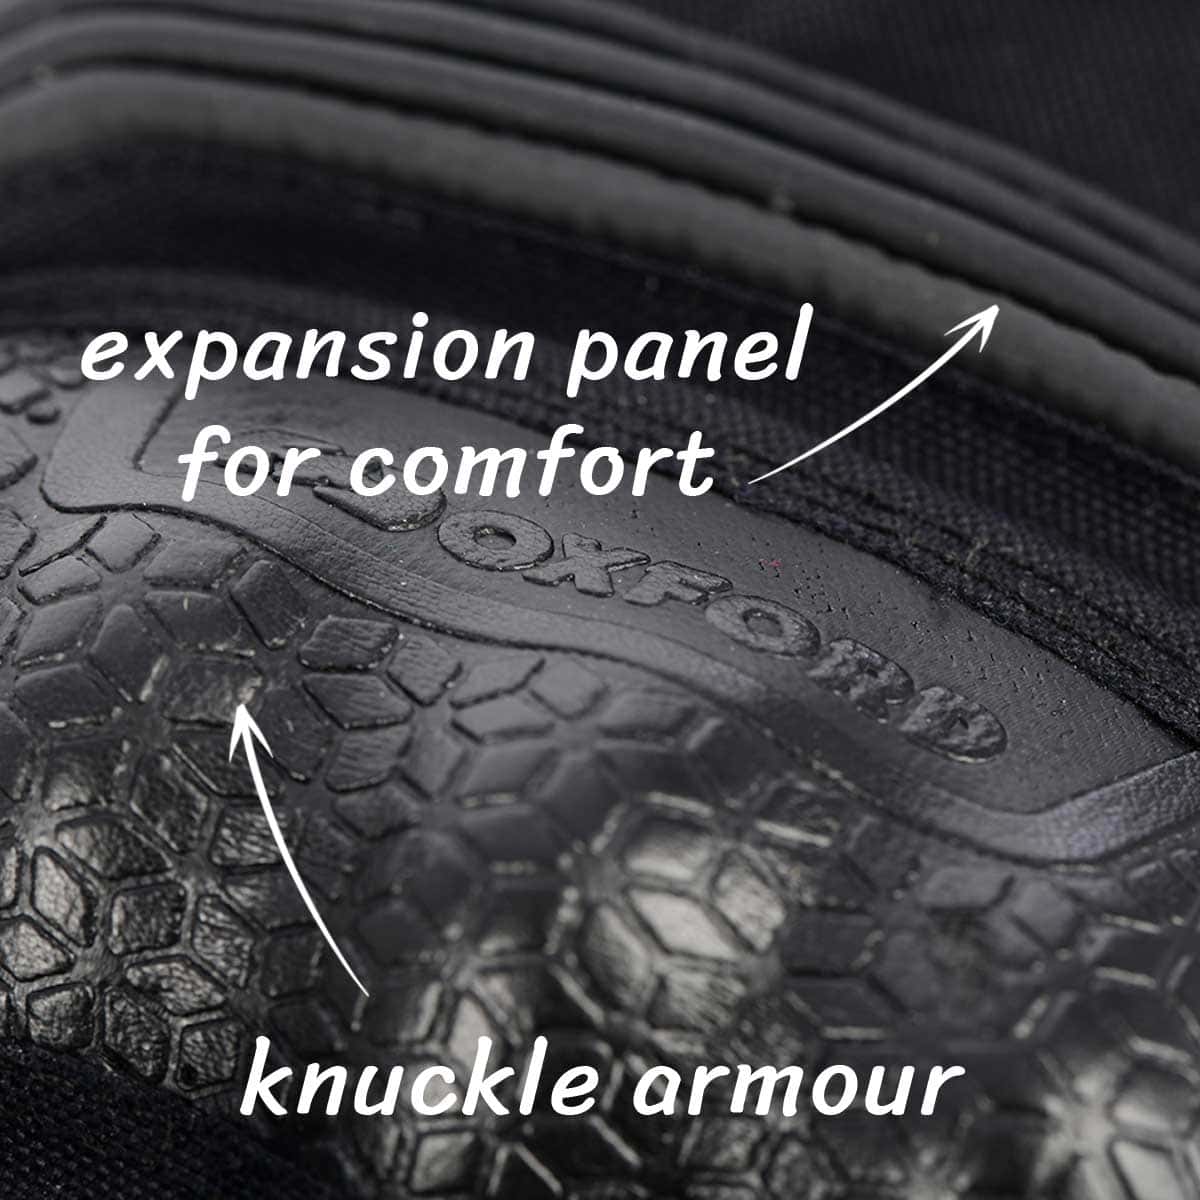 Oxford Montreal 4.0 Winter Gloves: Get Ready For Adventures